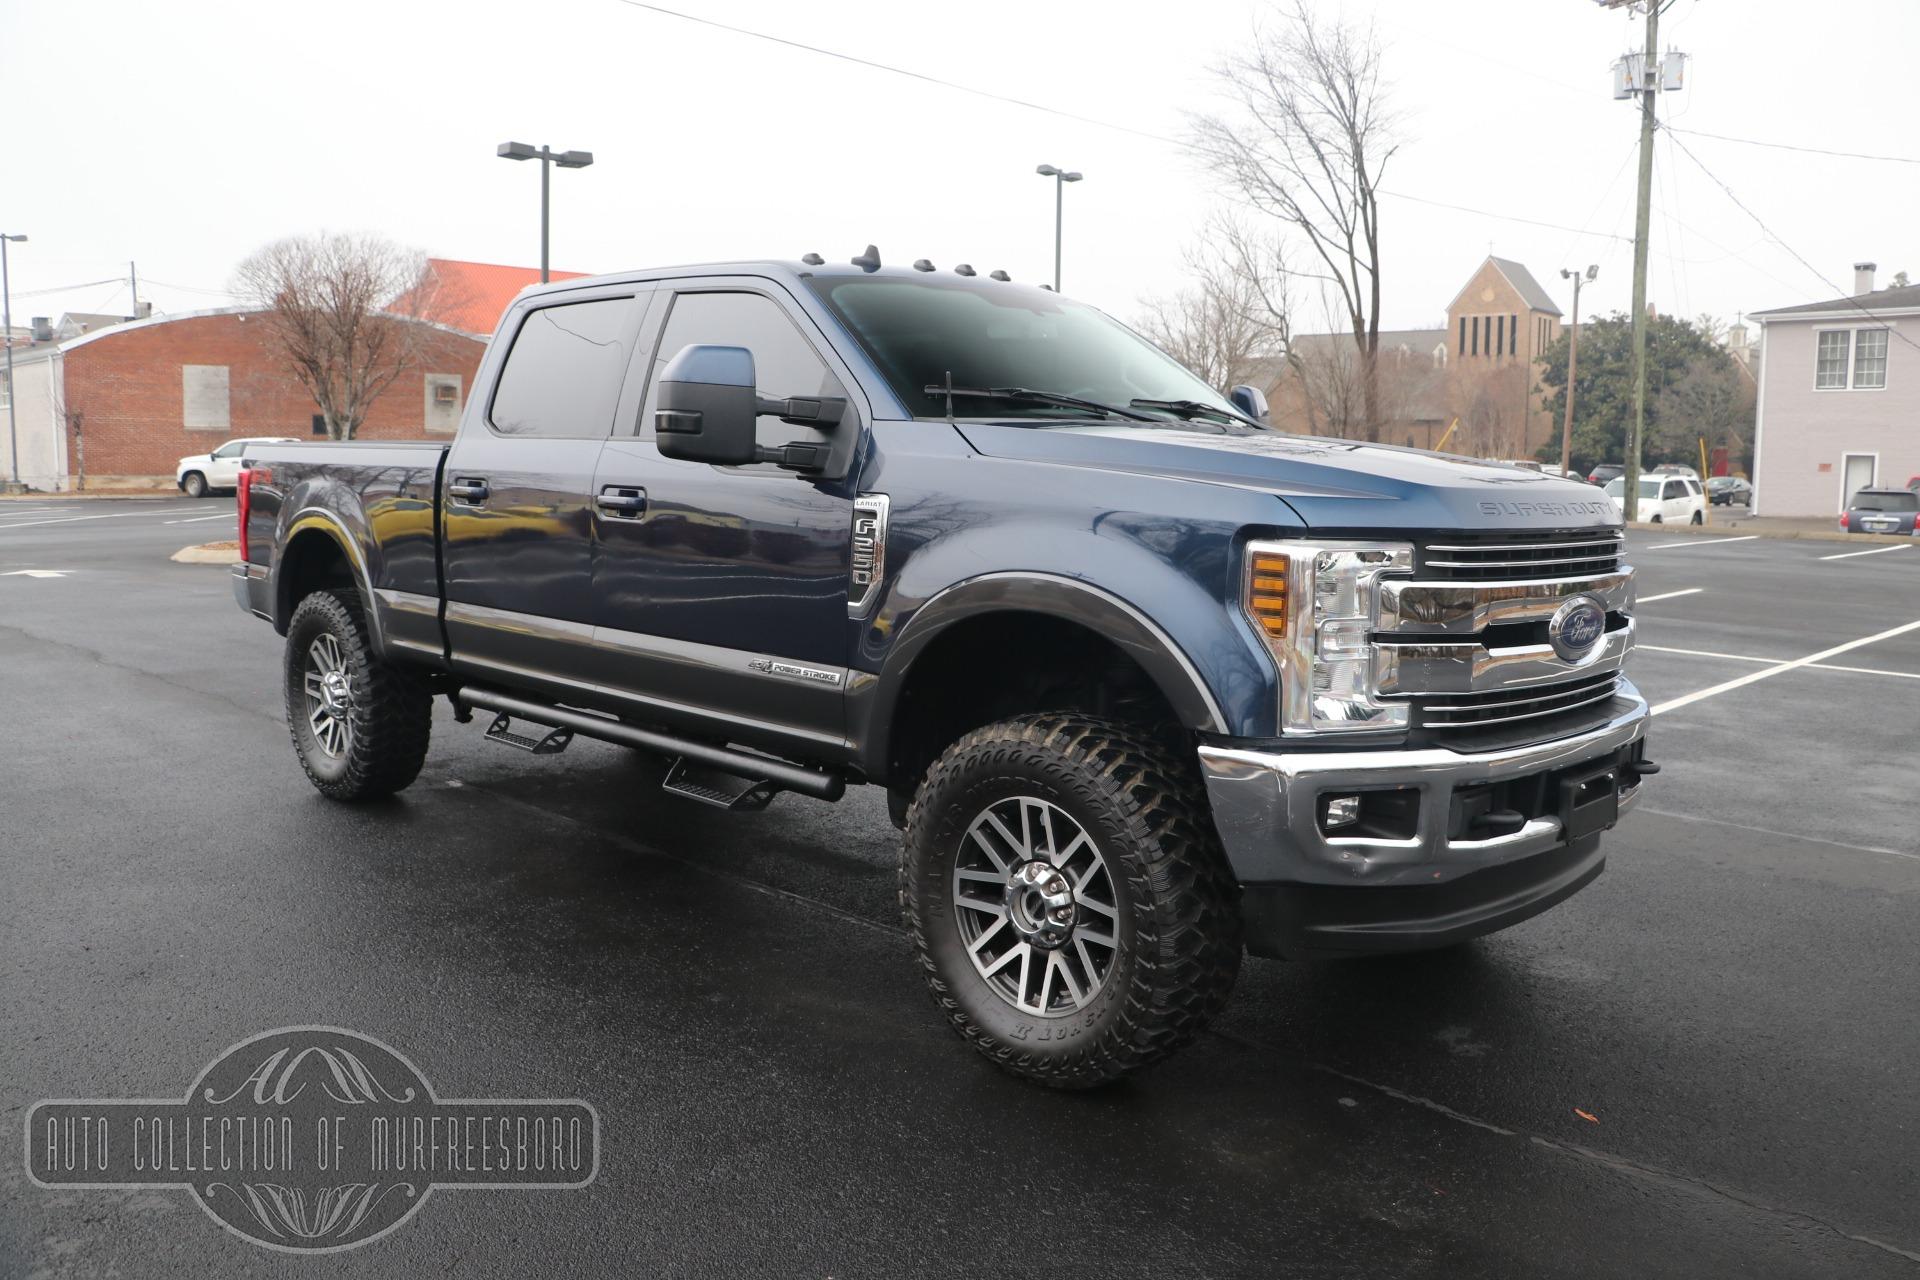 Used 2019 Ford F-250 SUPER DUTY LARIAT POWER STROKE DIESEL LARIAT VALUE PACK for sale $54,950 at Auto Collection in Murfreesboro TN 37129 1